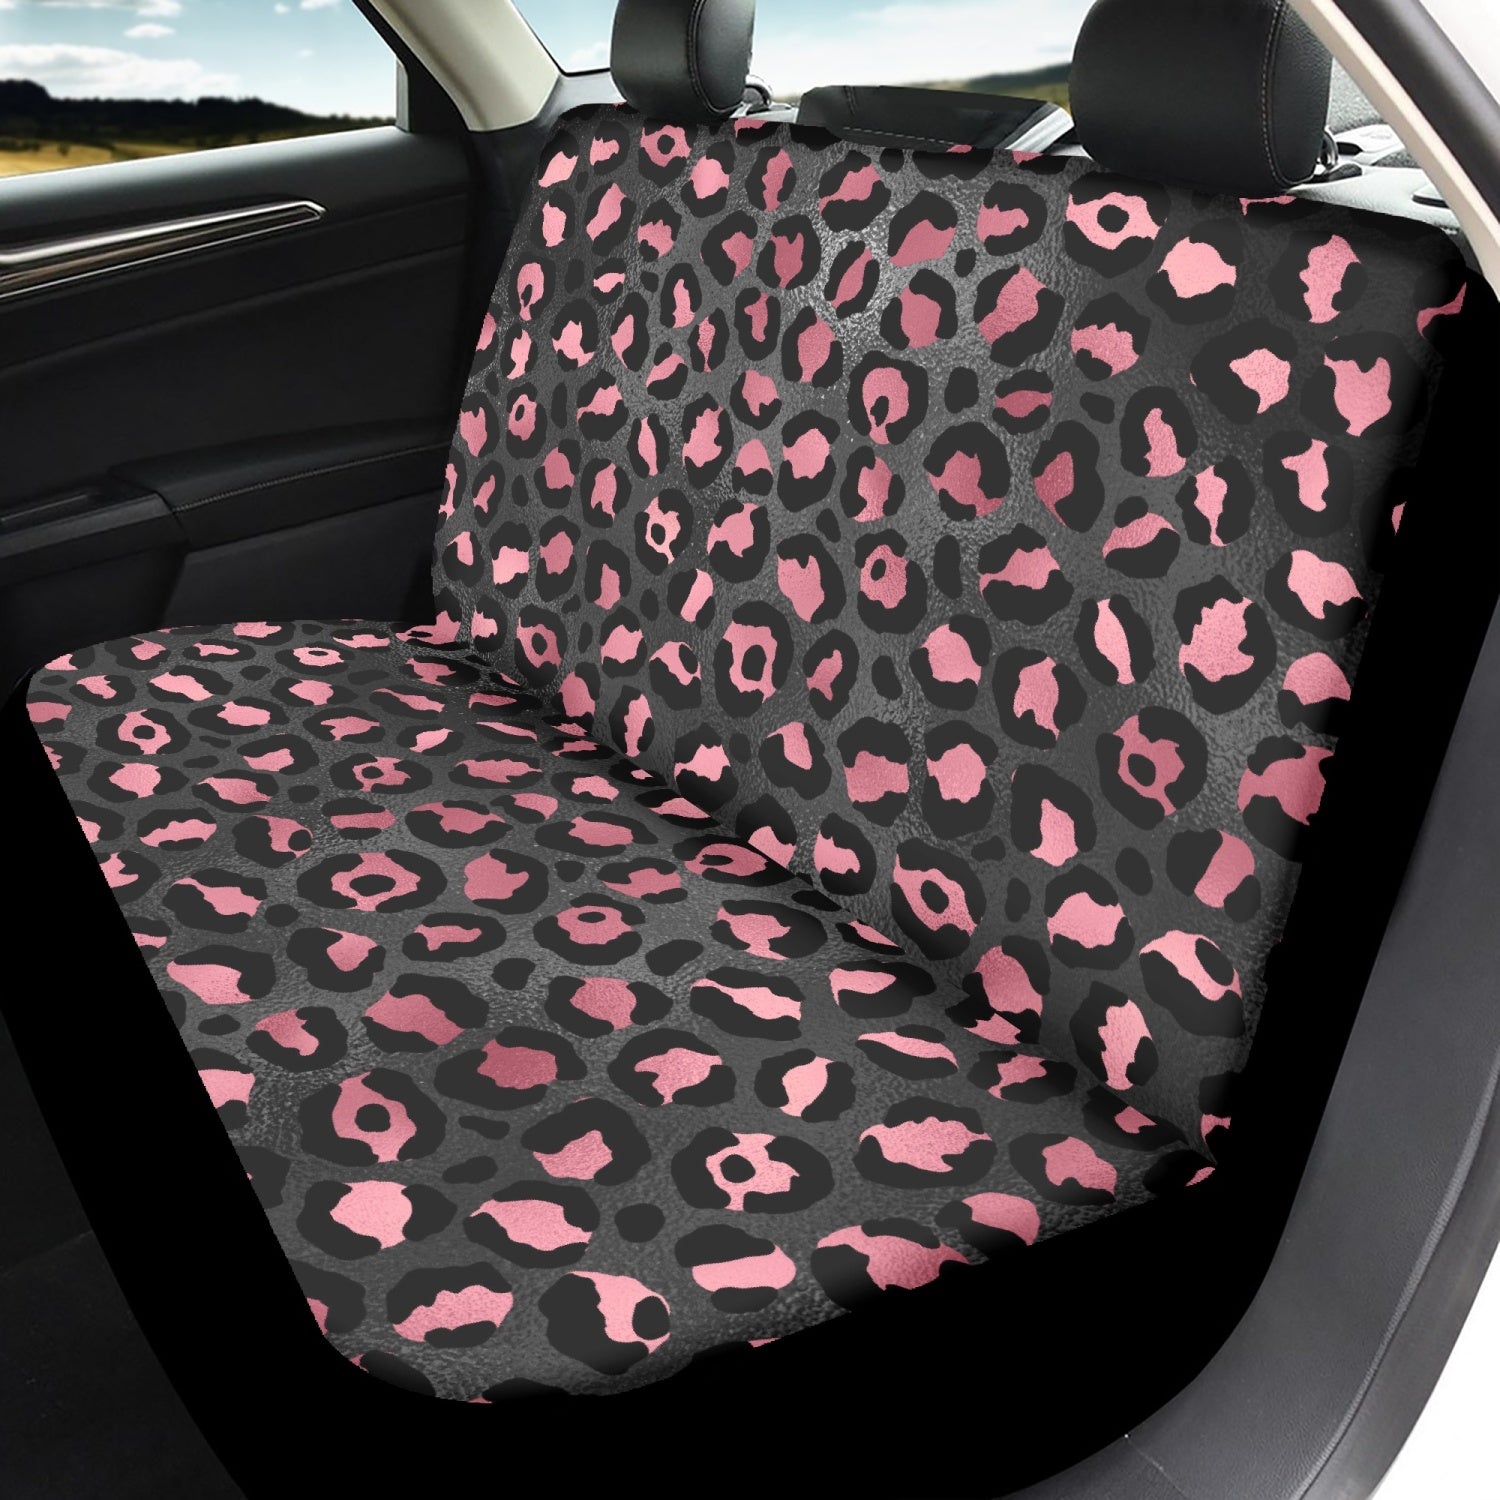 Pink and Gold Leopard Print Microfiber Car Seat Covers - 3Pcs